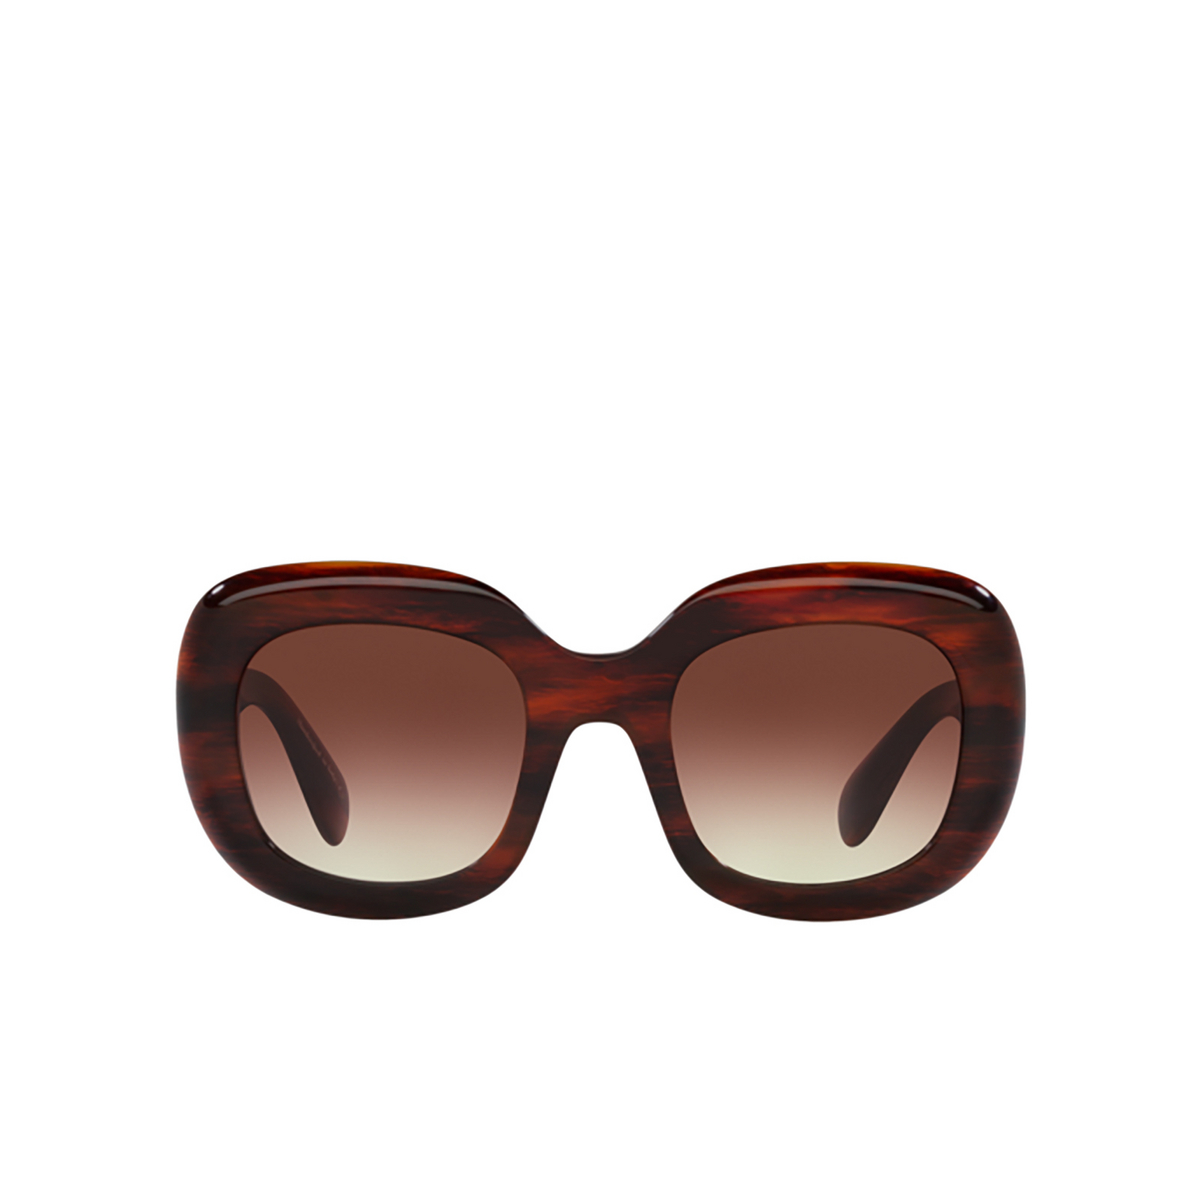 Oliver Peoples JESSON Sunglasses 172513 Vintage red tortoise - front view